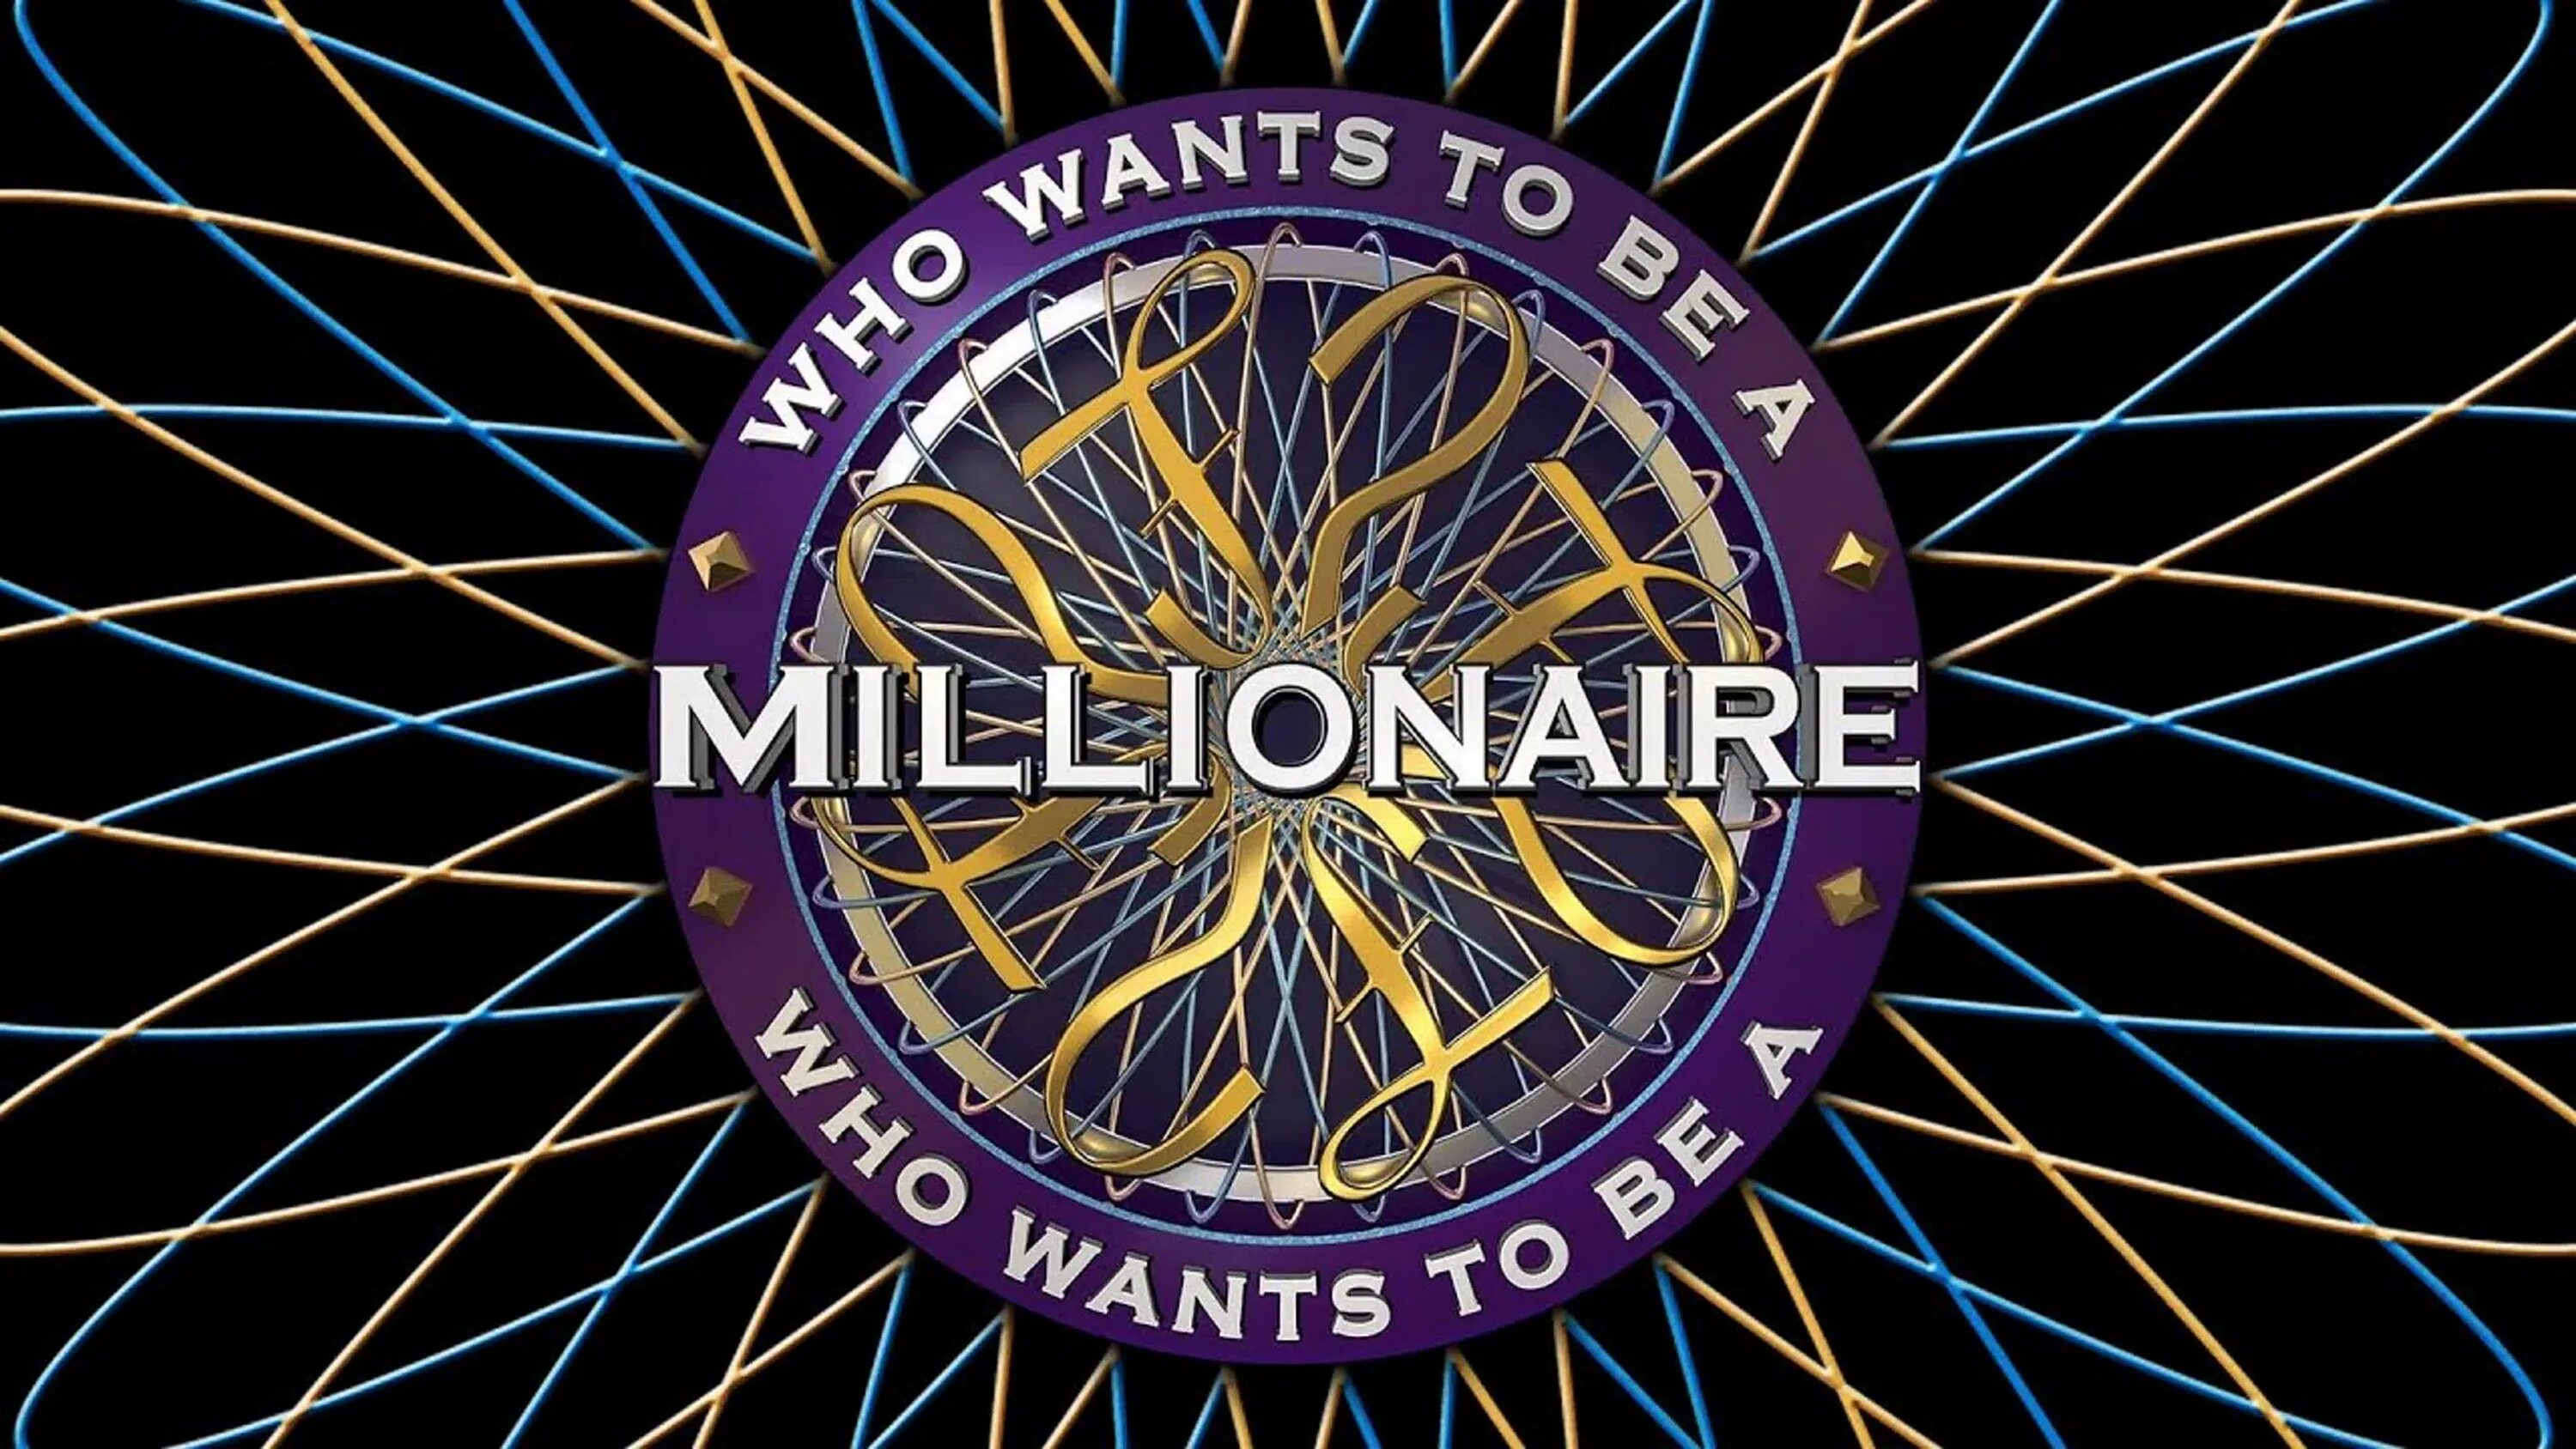 Who wants to be the to my. Who wants to be a Millionaire. Who wants to be a Millionaire логотип. Who wants to be a Millionaire 1998. Who wants to be a Millionaire uk 1998.